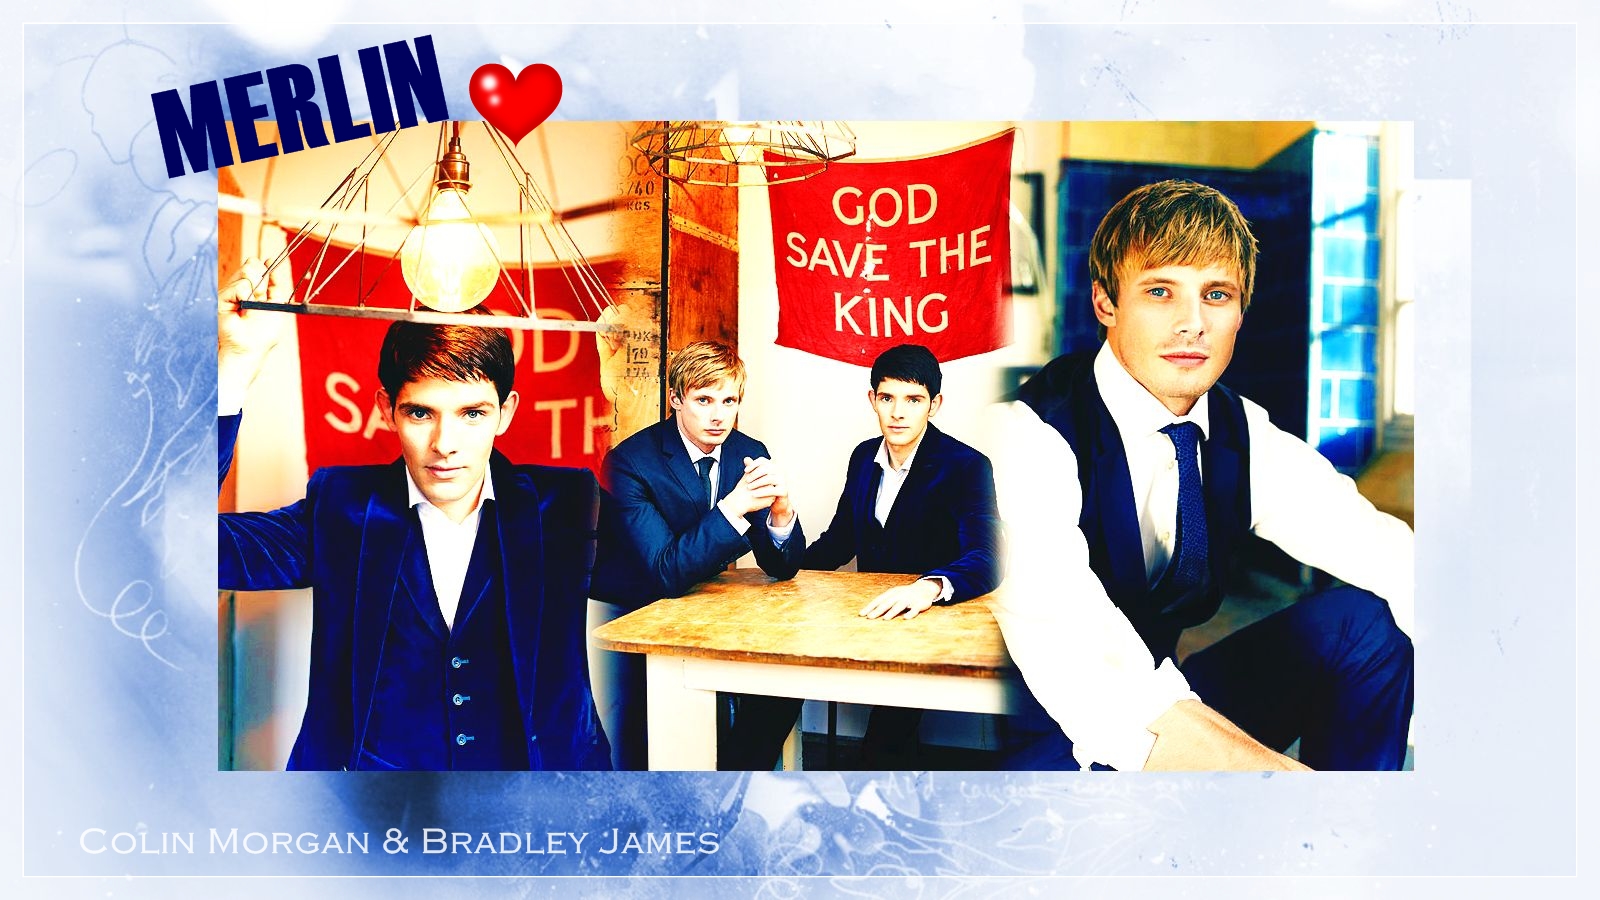 COLIN MORGAN BRADLEY JAMES by Anthony258 on